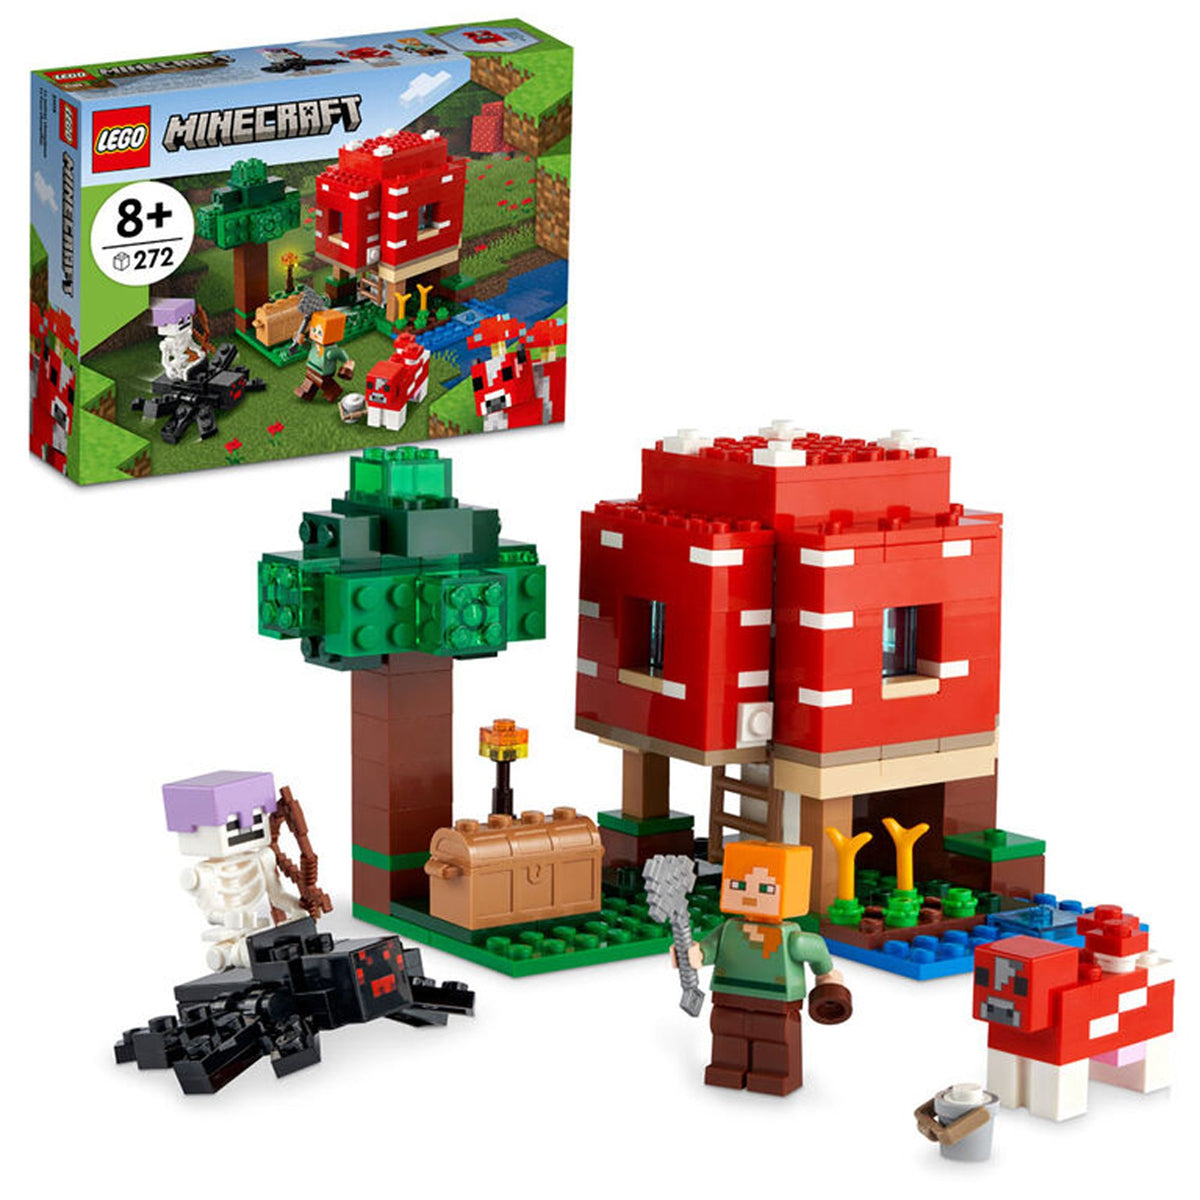 LEGO Toys & Games LEGO Minecraft The Mushroom House, 21179, Ages 8+, 272 Pieces 673419358507